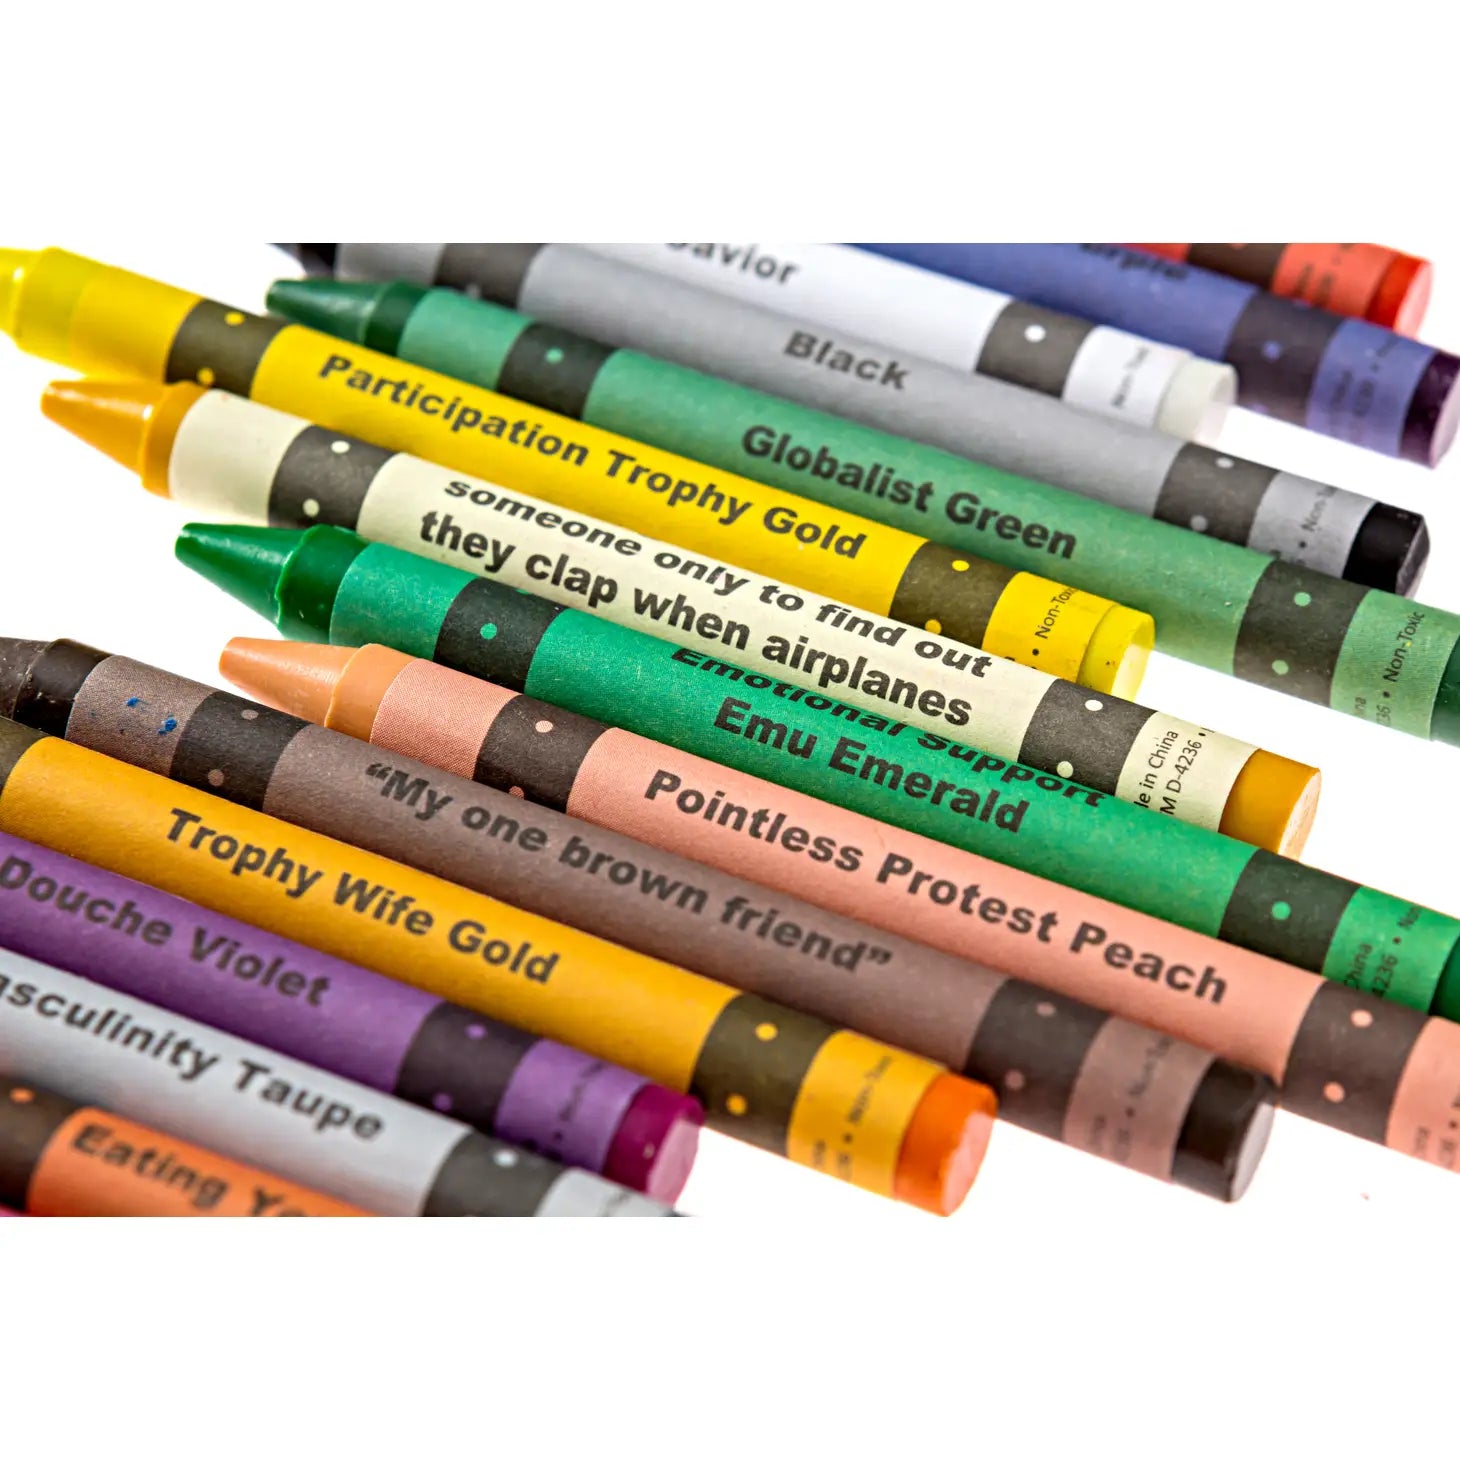 Red White and F*ck You Politically Offensive Crayons - Unique